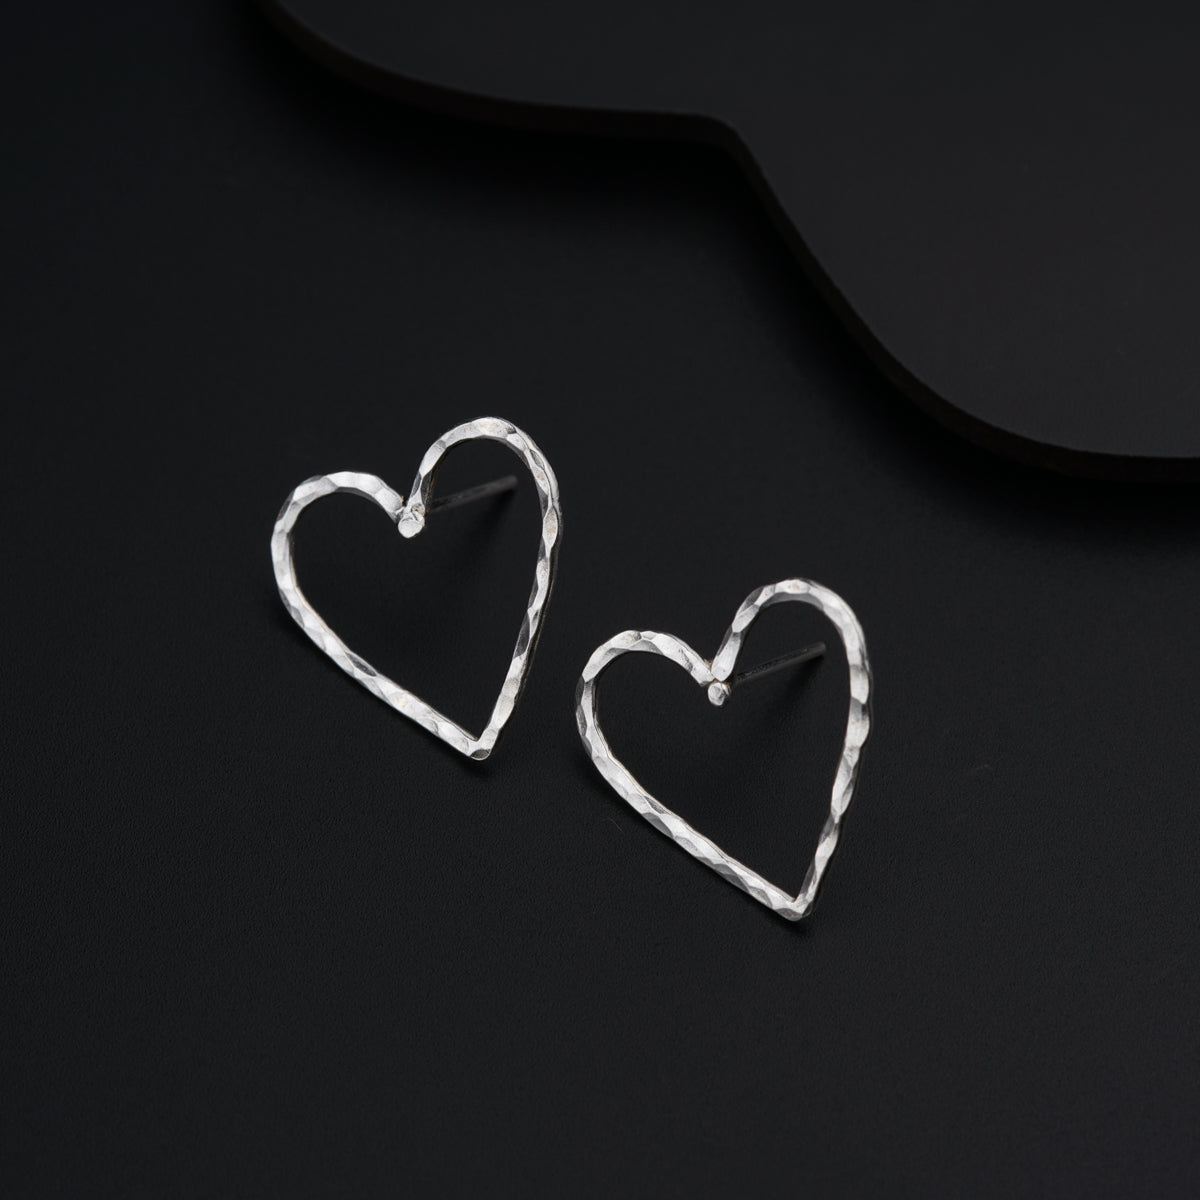 a pair of heart shaped earrings sitting on top of a black surface